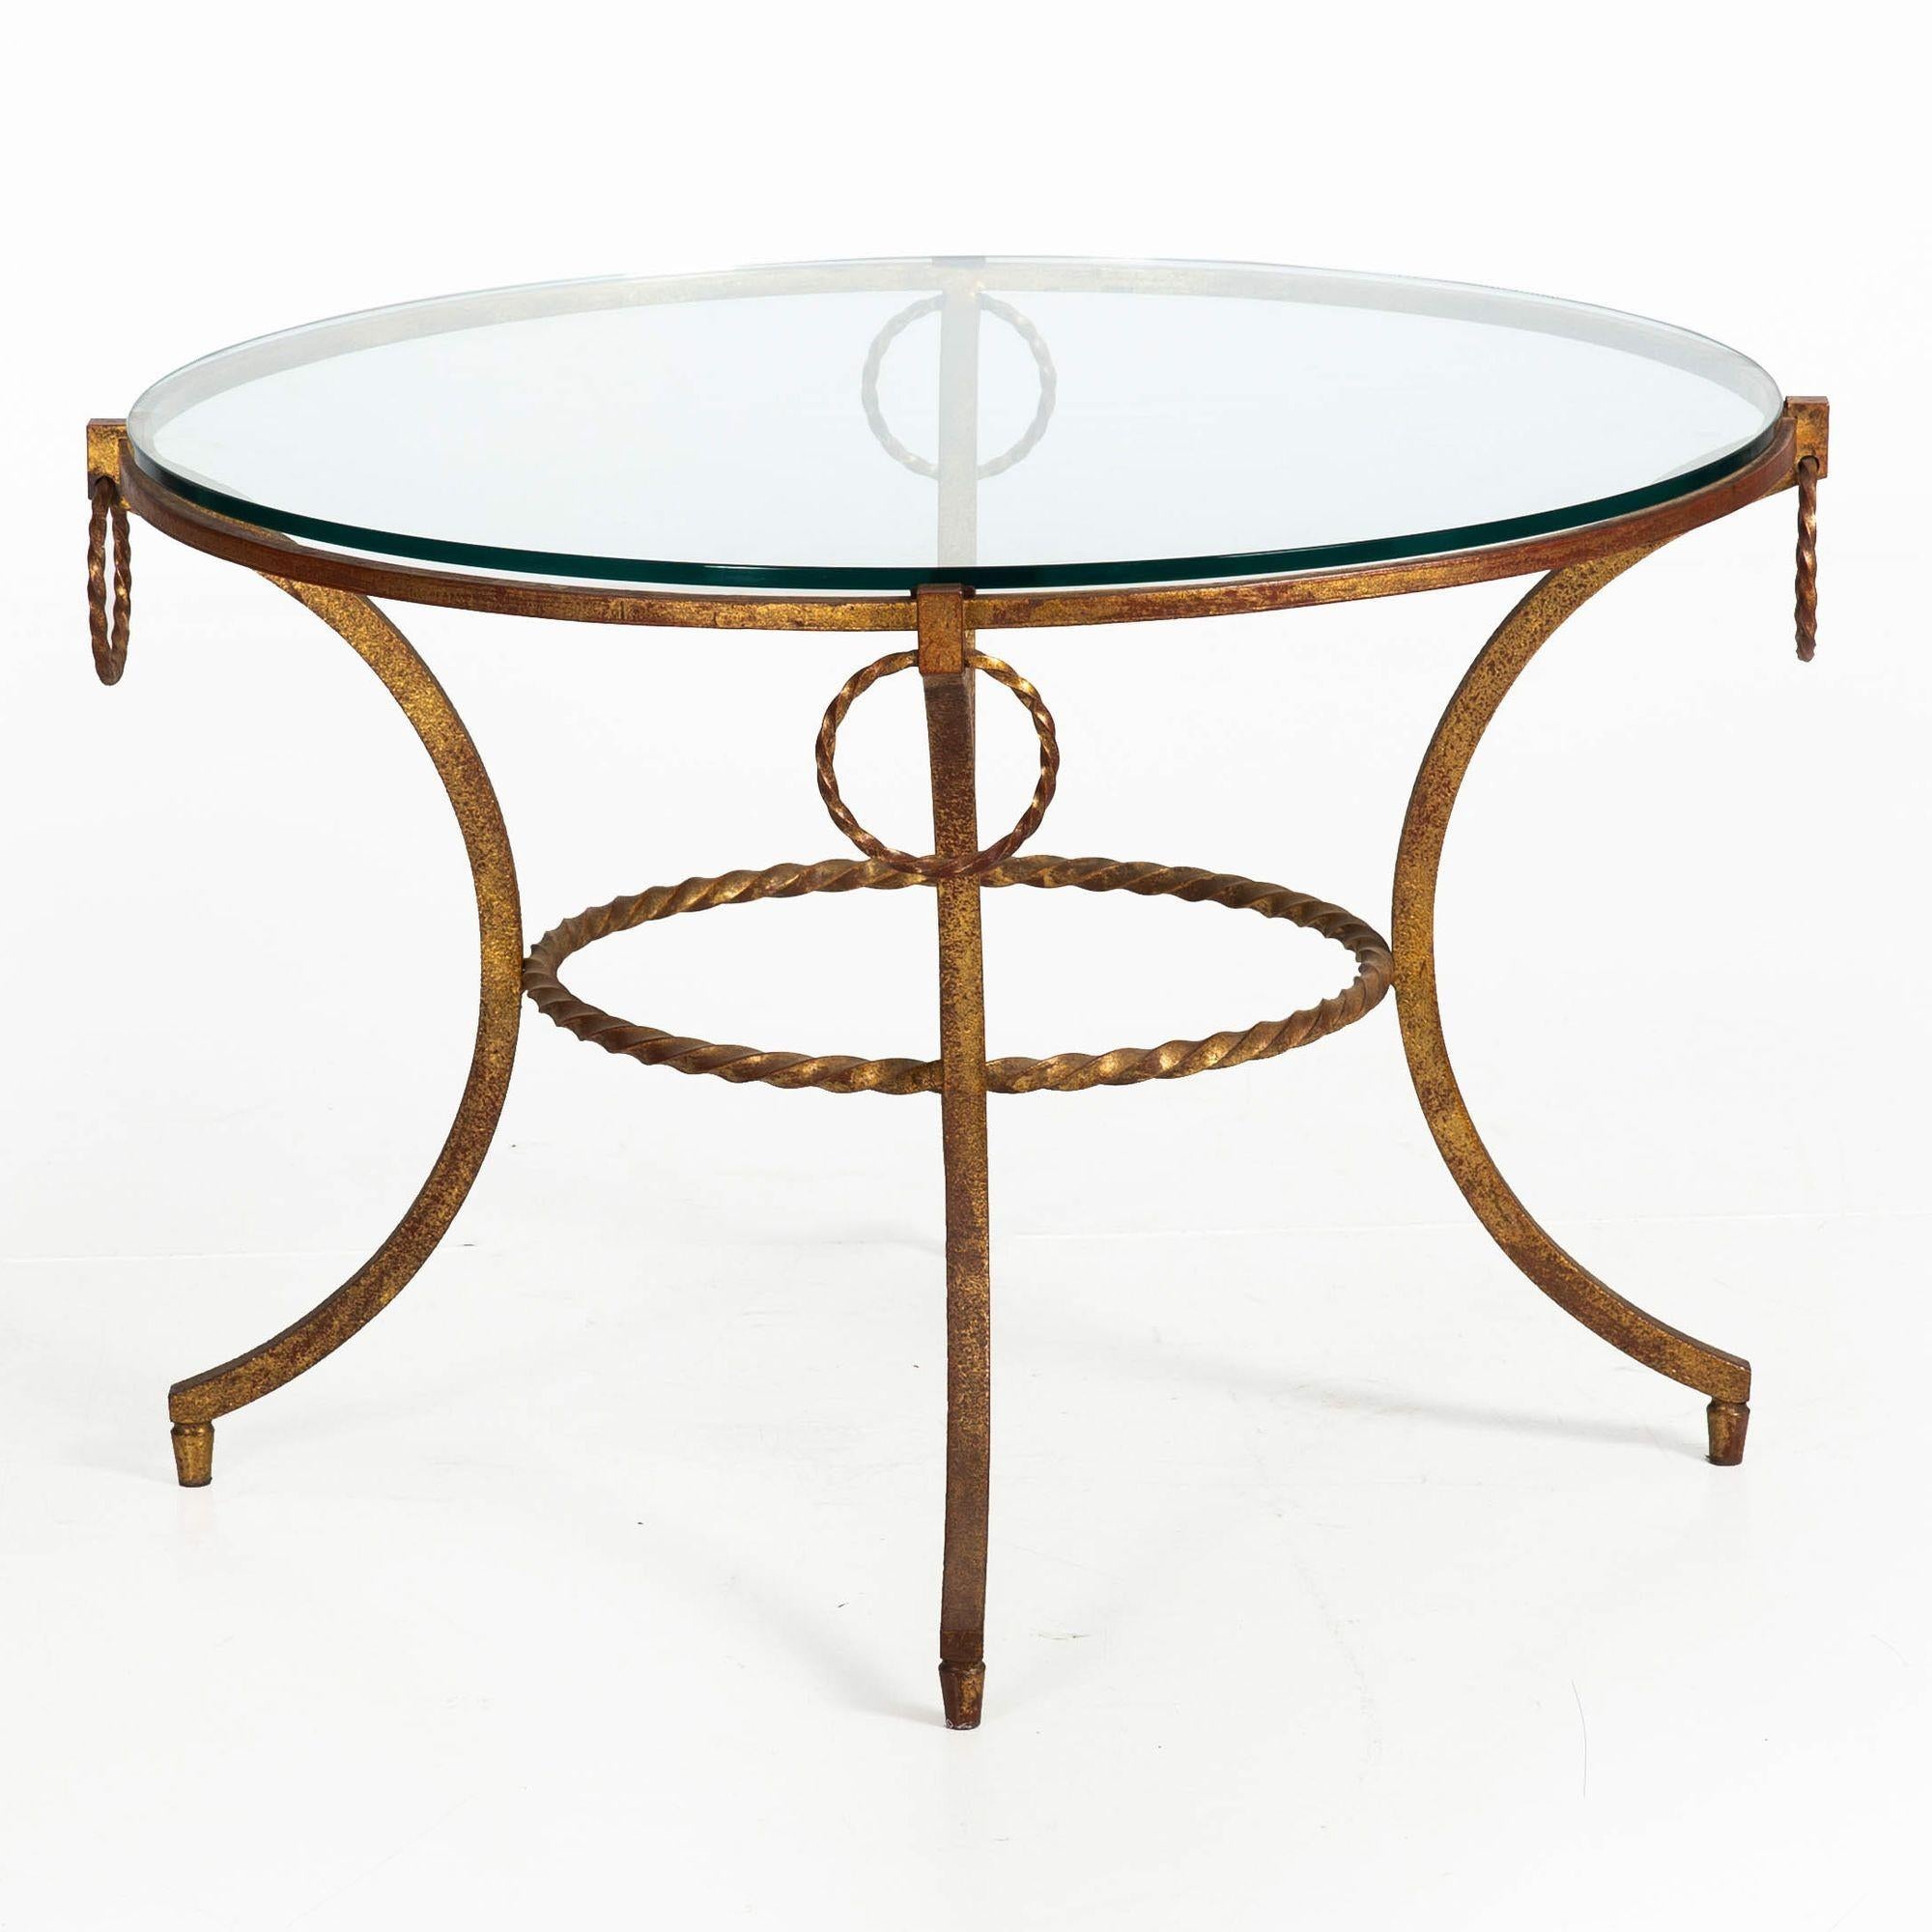 French Modernist Gilded Wrought-Iron & Glass Coffee Accent Table ca. 1950s In Good Condition For Sale In Shippensburg, PA